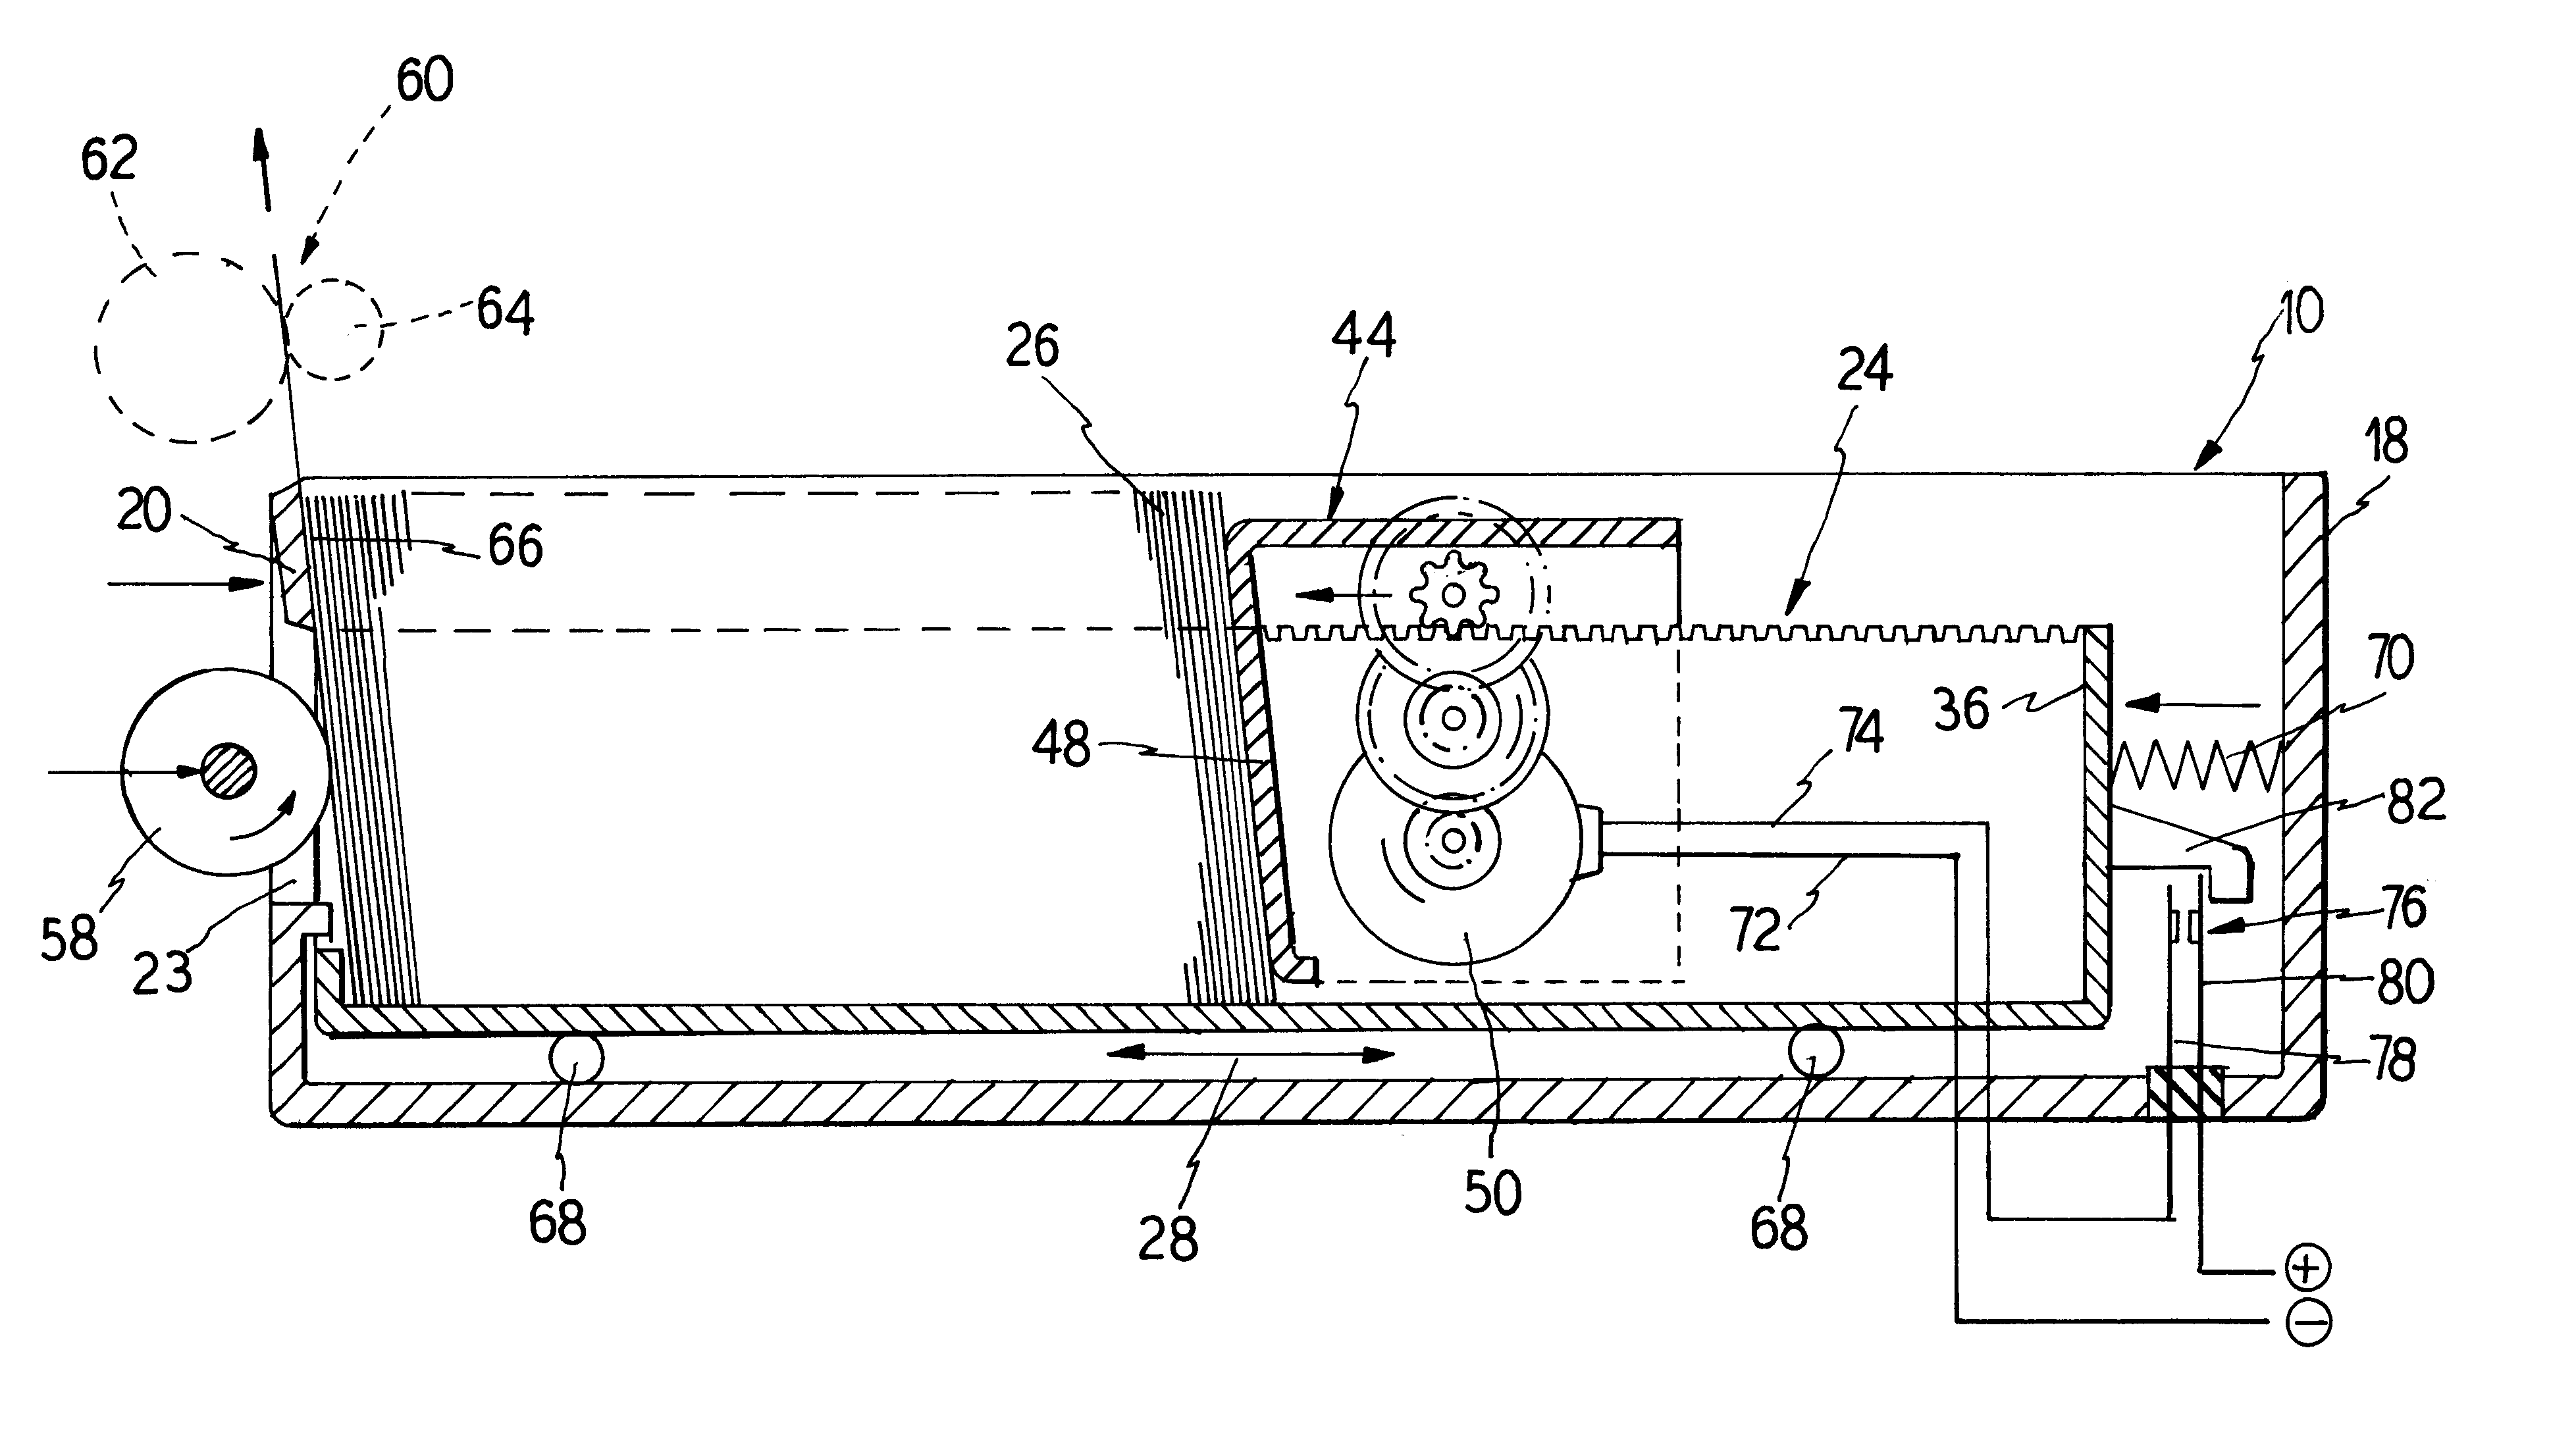 Sheet extracting device with a cassette for receiving a stack of sheets